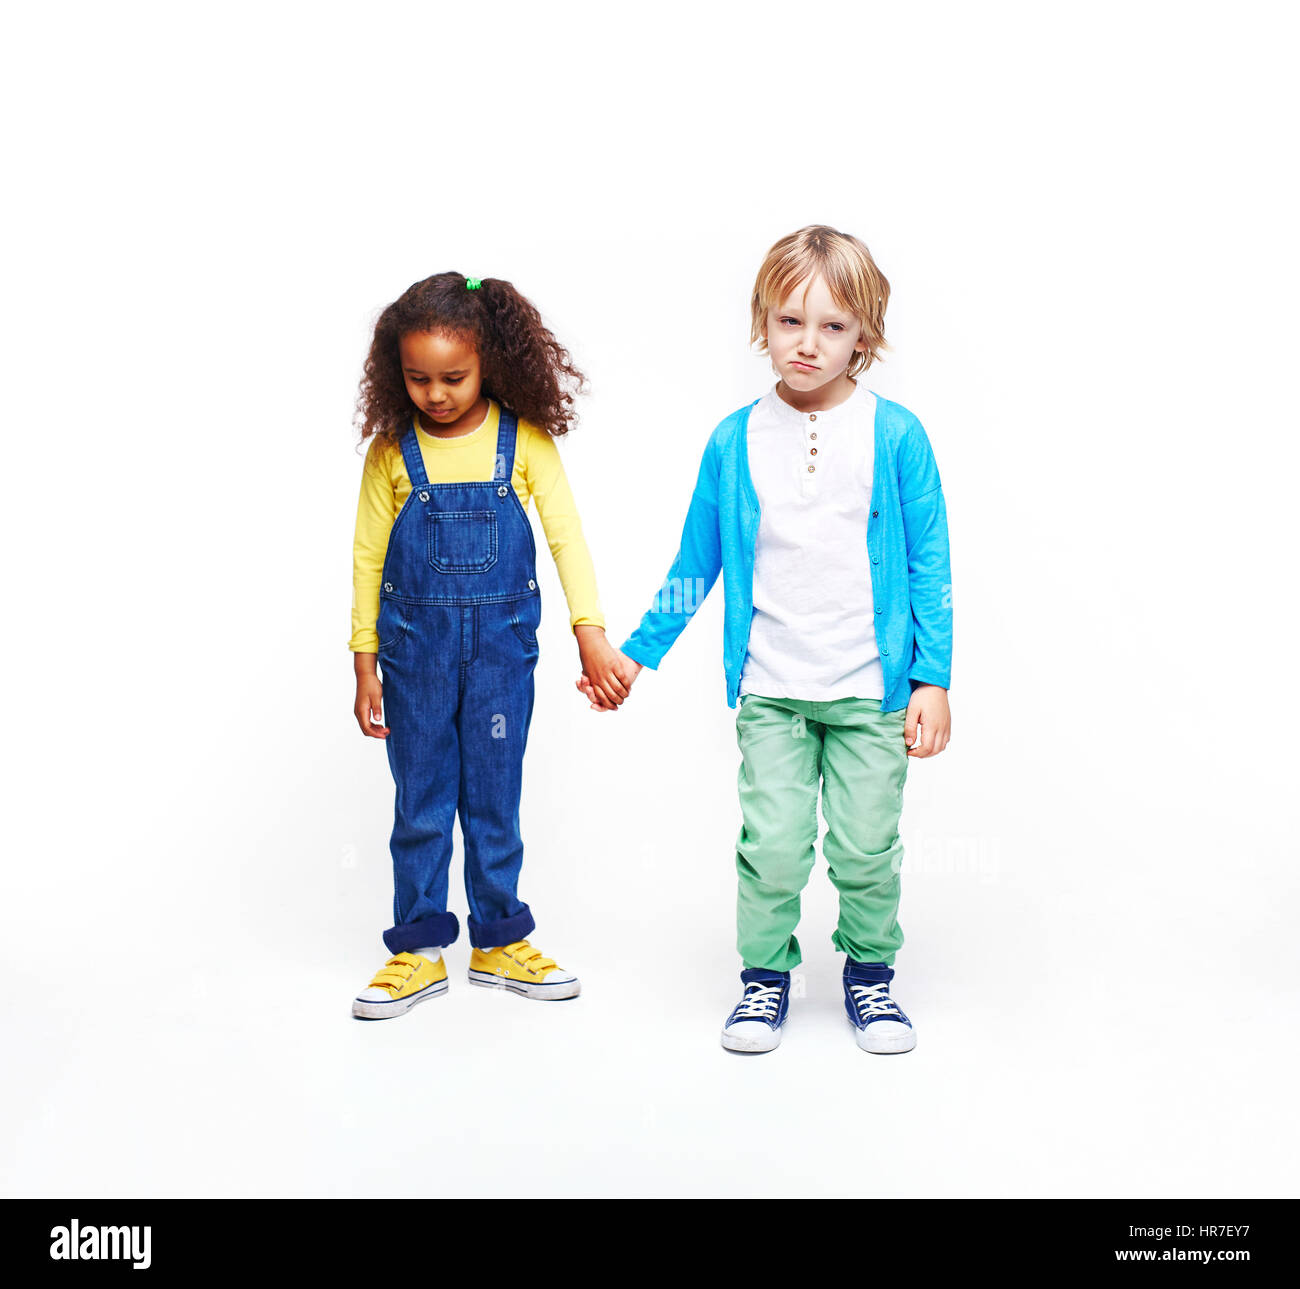 Studio portrait of children against white background: full body shot of two kids, African girl and blond boy, standing together holding hands both loo Stock Photo